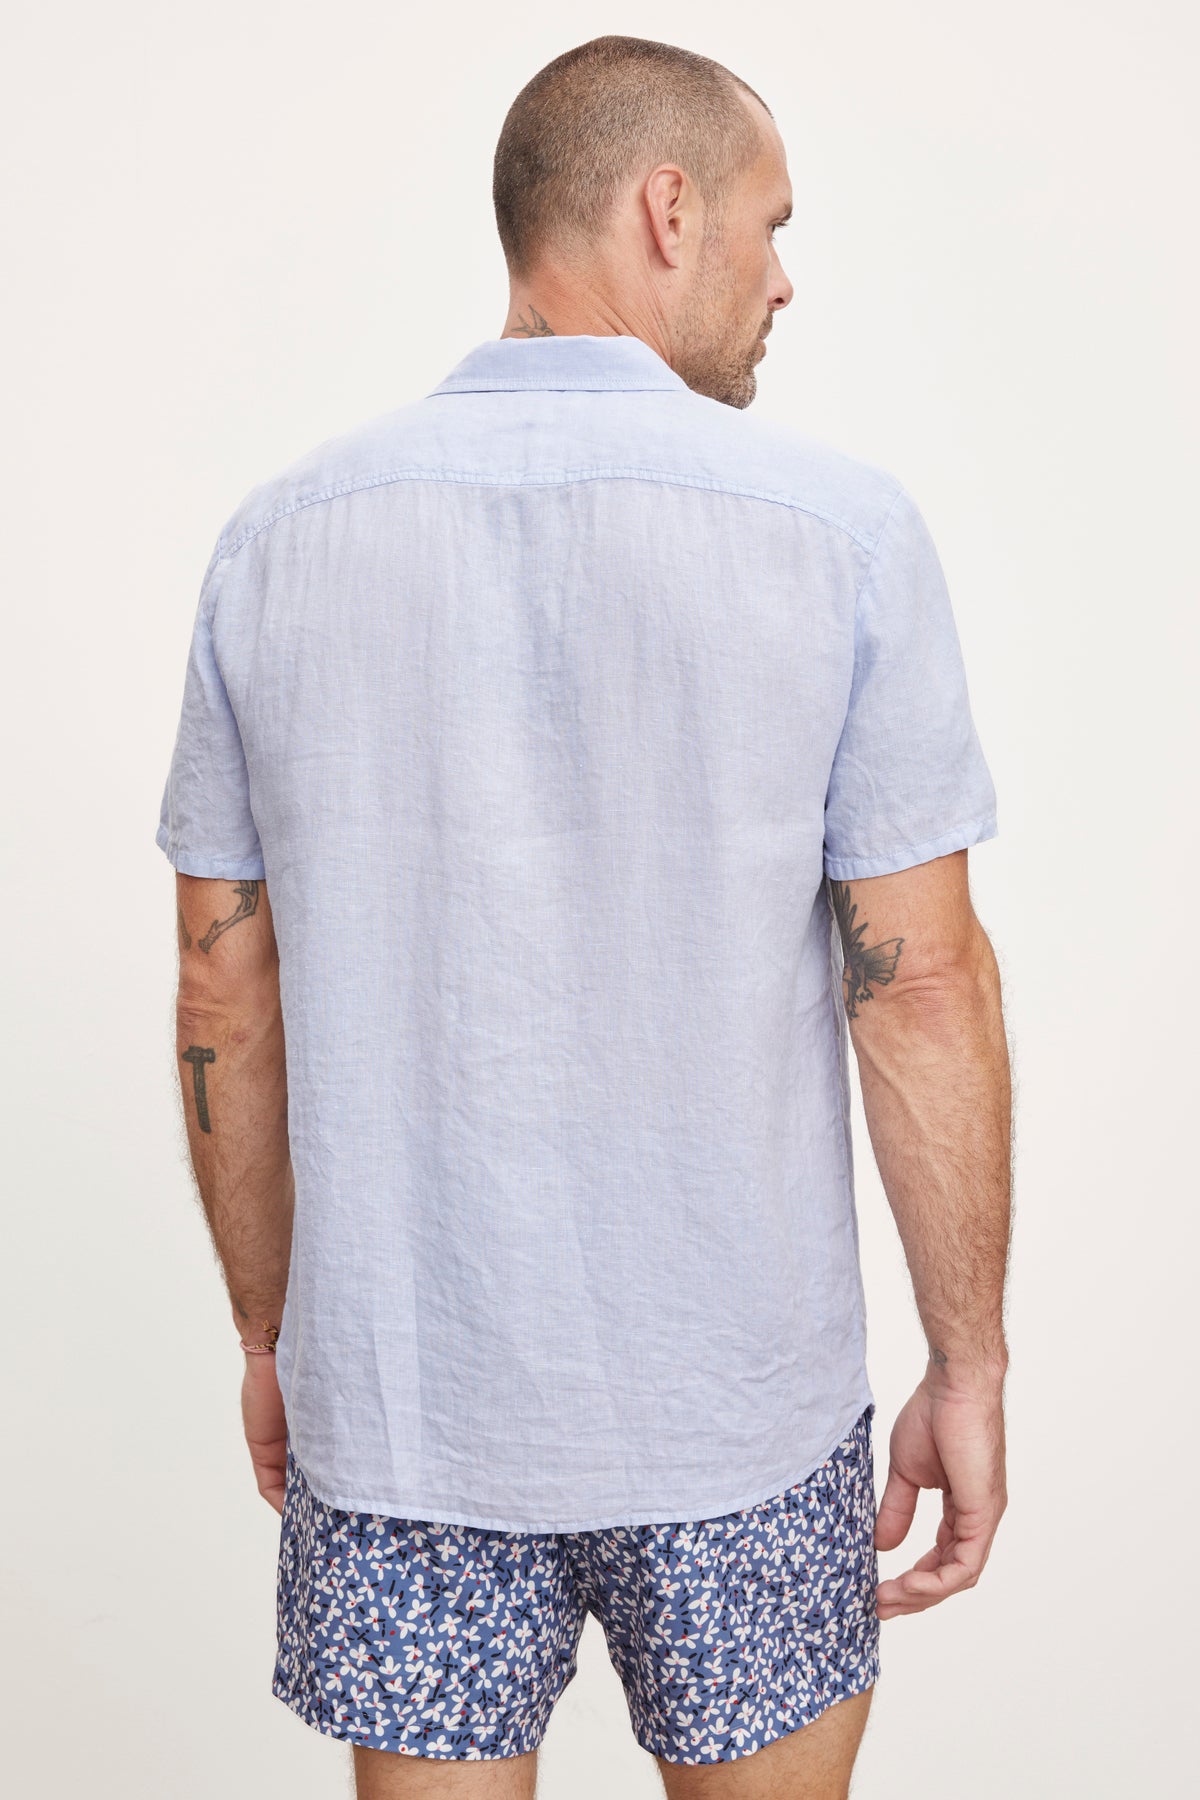 A man seen from behind wears a Velvet by Graham & Spencer MACKIE LINEN BUTTON-UP SHIRT and patterned shorts, standing against a white background.-36753546346689